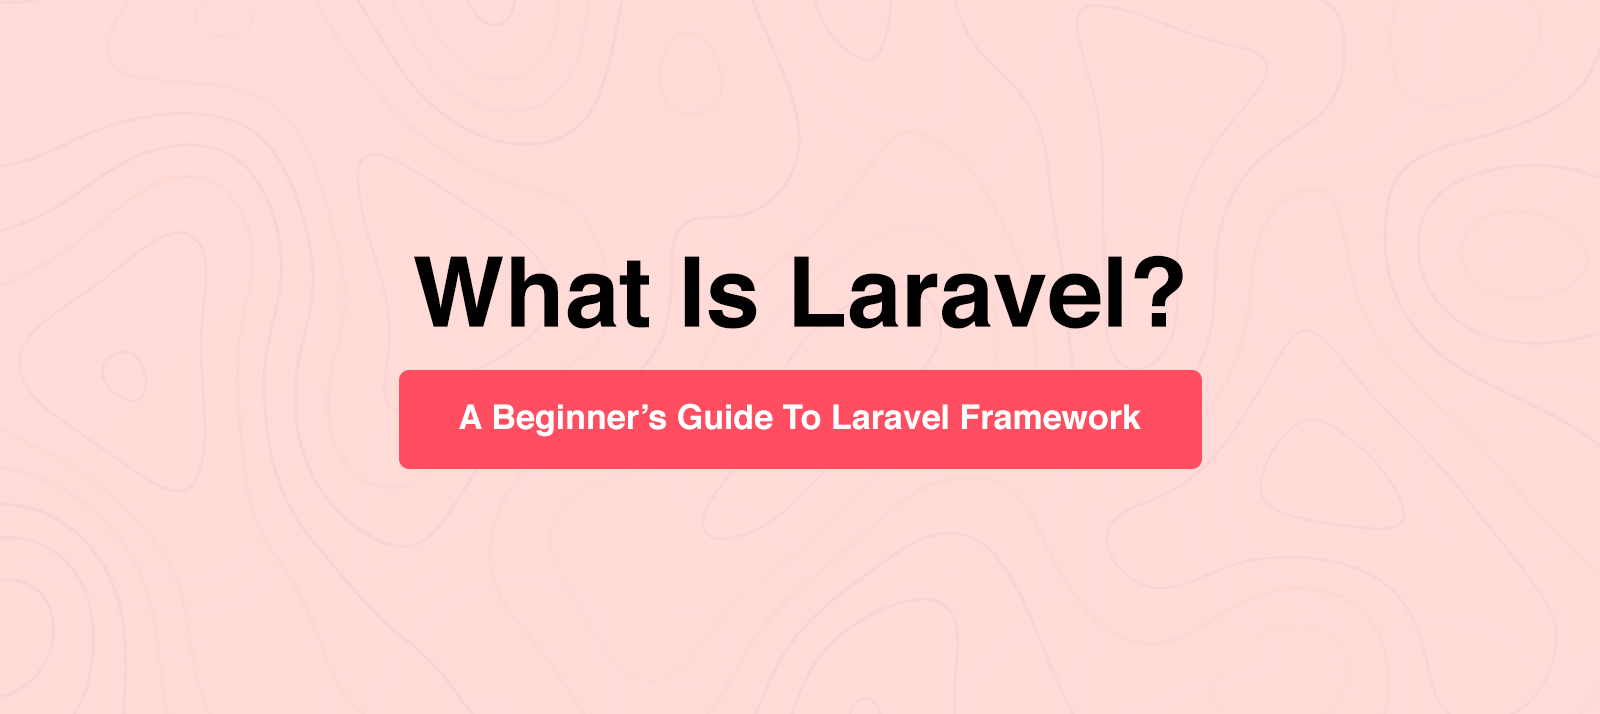 What is Laravel? and Its Features.